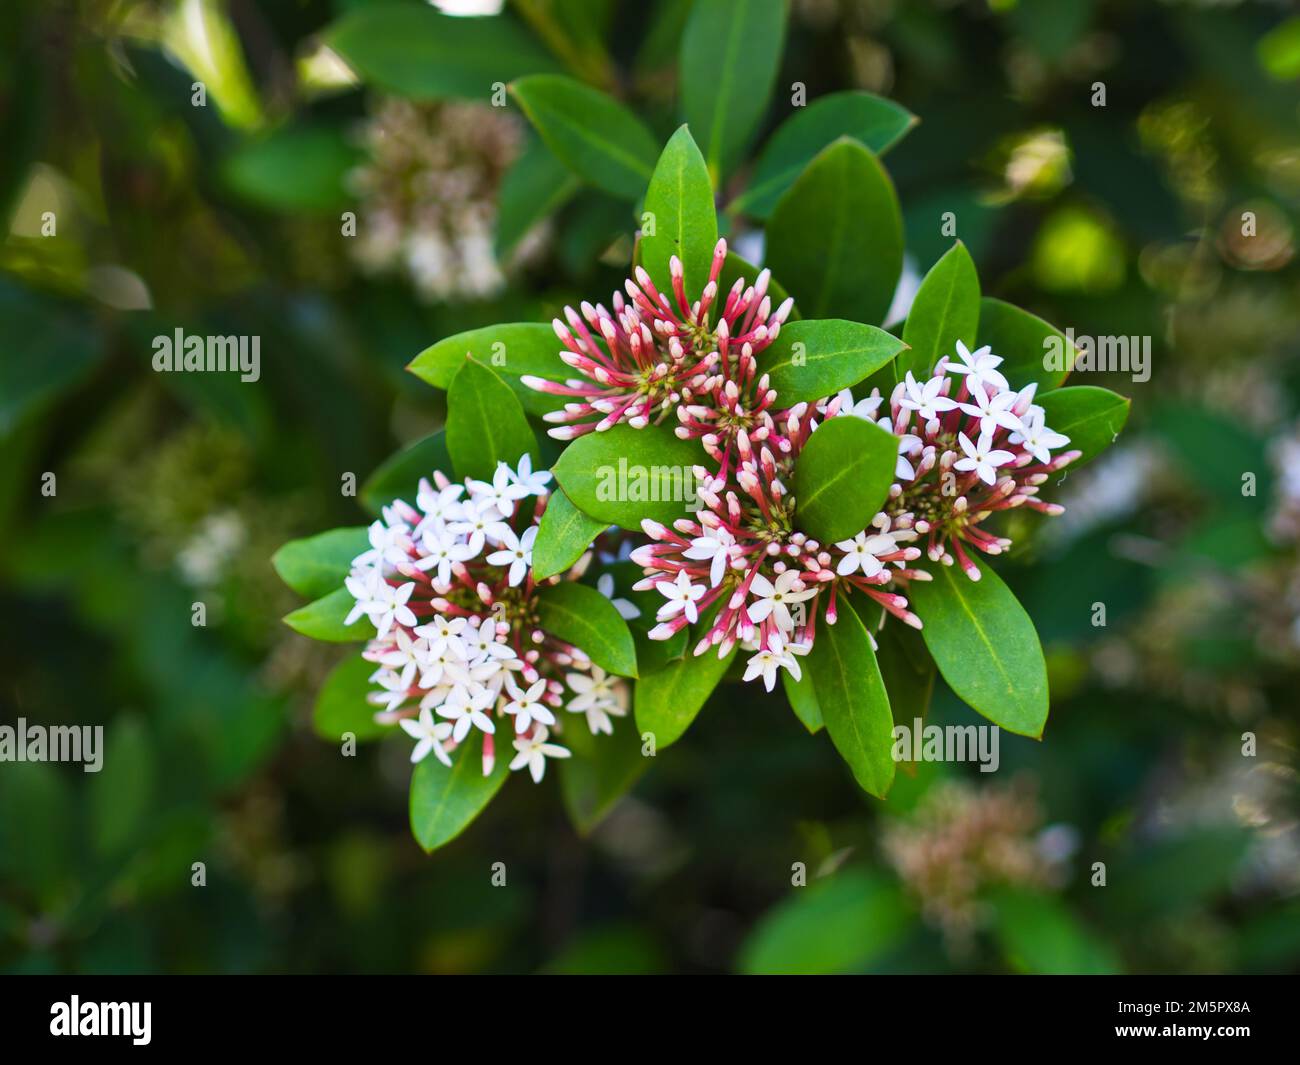 Blooming Acokanthera with green leaves in closeup Stock Photo